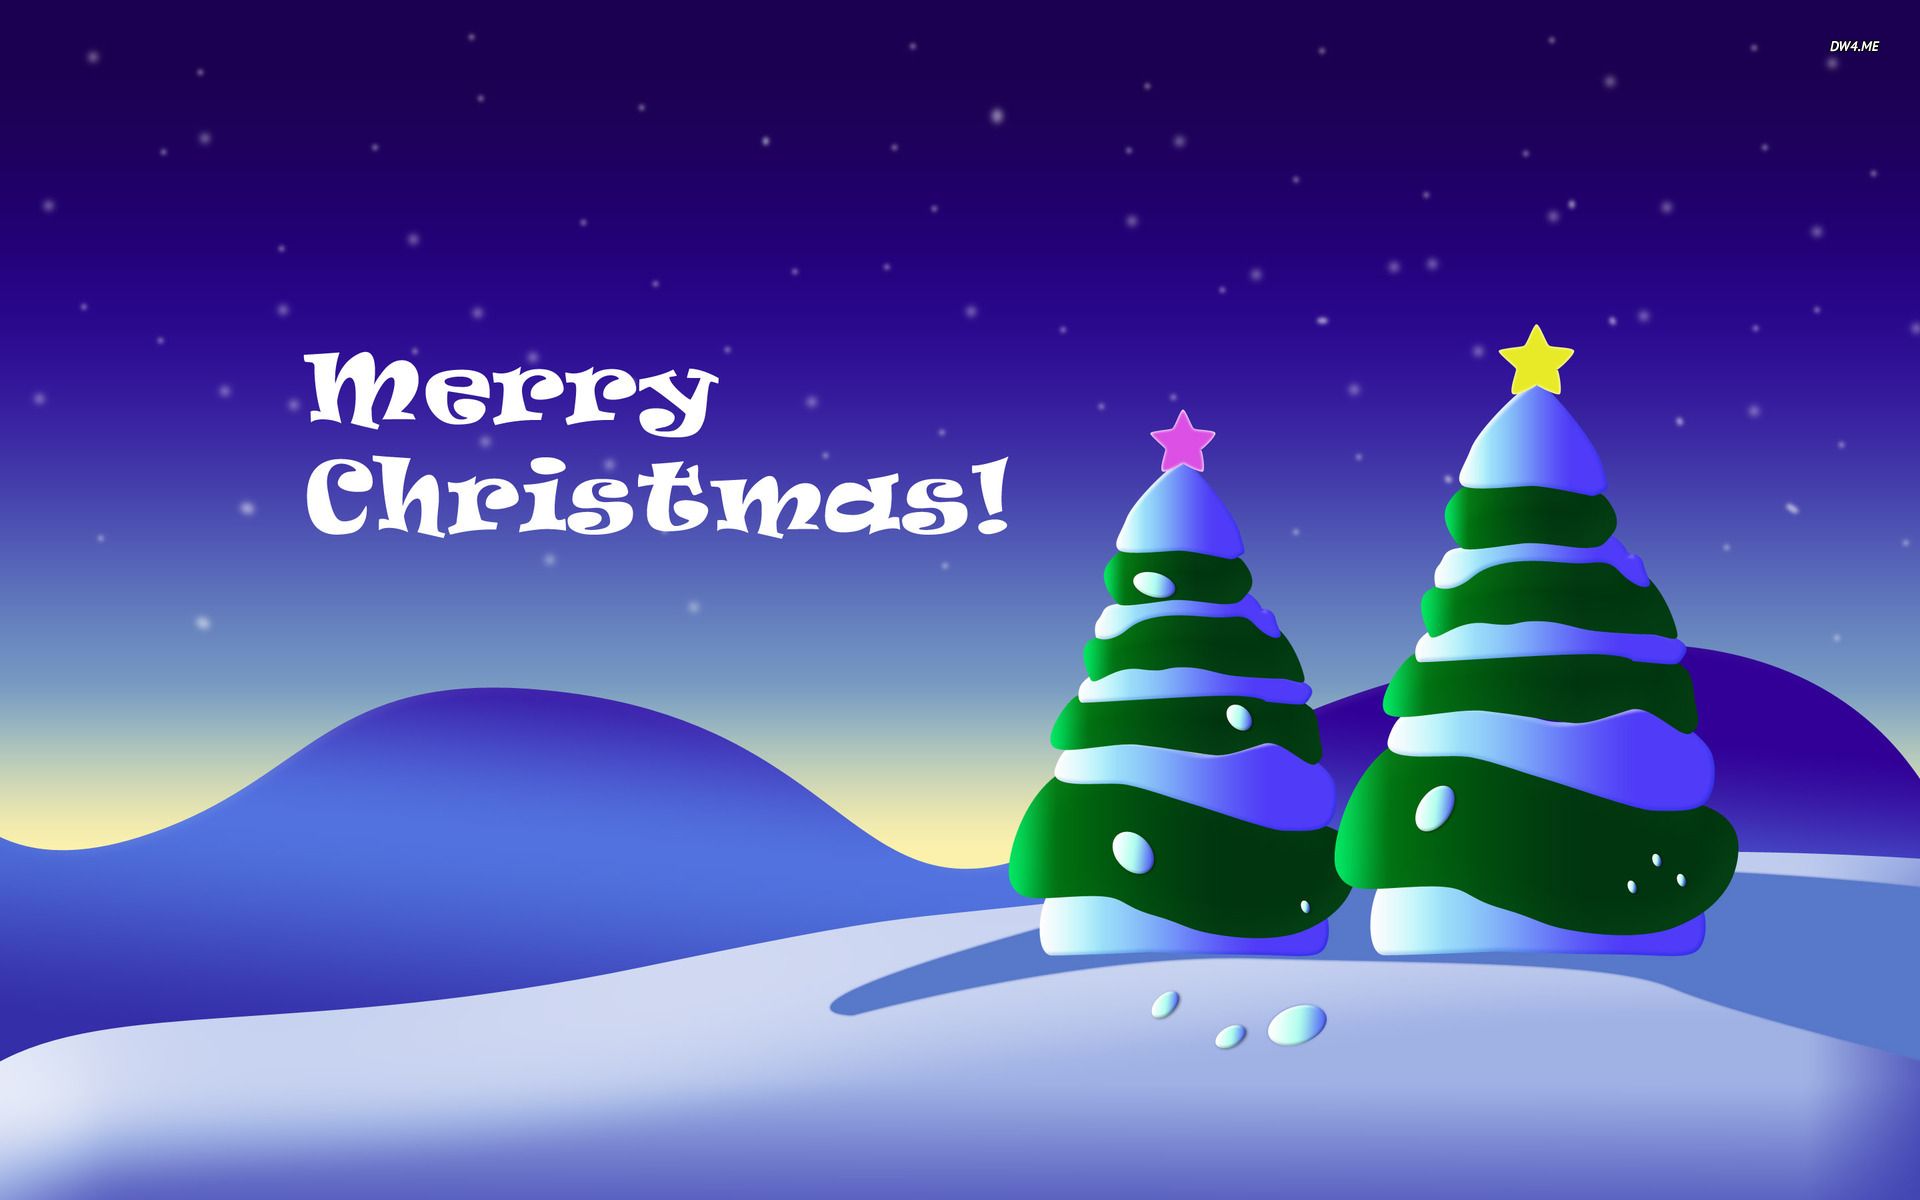 Merry Christmas tree free download wallpaper 2015 Wallpapers